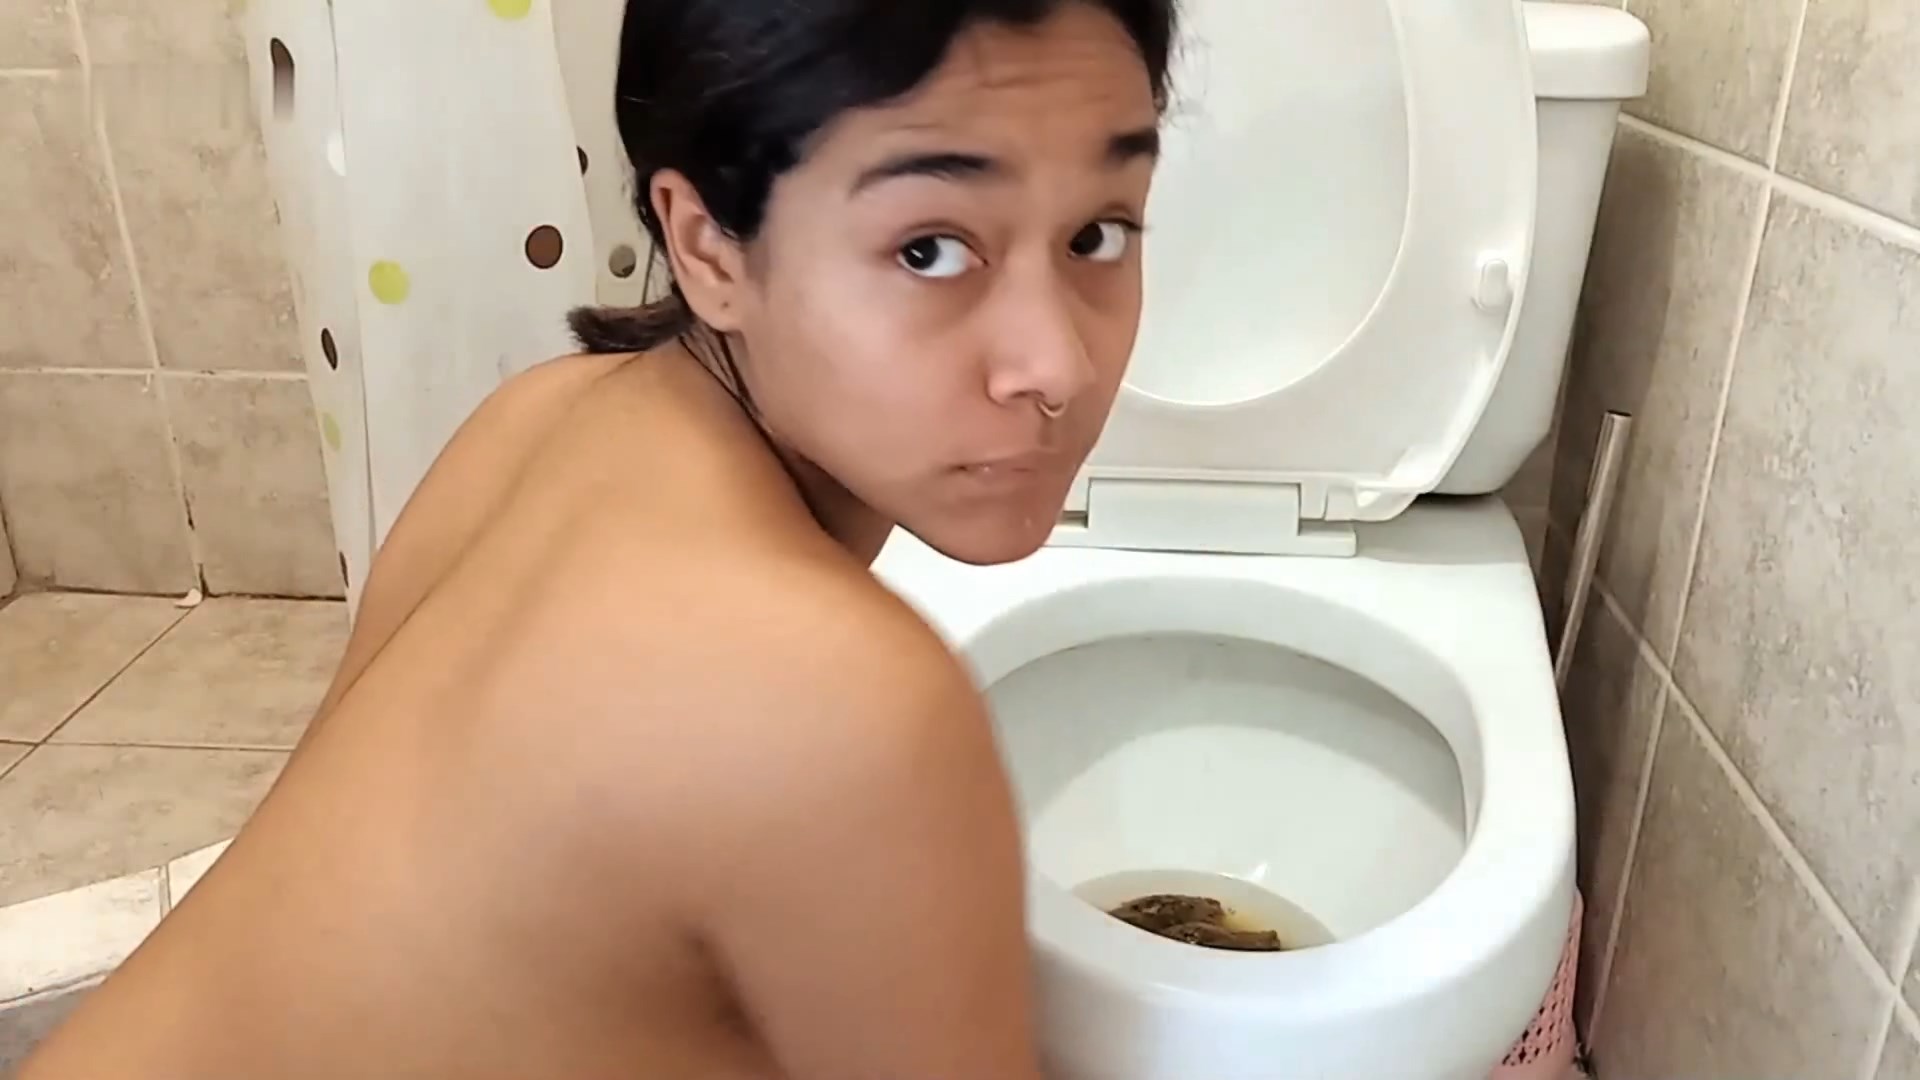 Eating my dirty toilet, after pooing (Special scat porn request from our  premium user) $28.99 by Mirellabb from 11 - Extreme Scat Porn Site #1